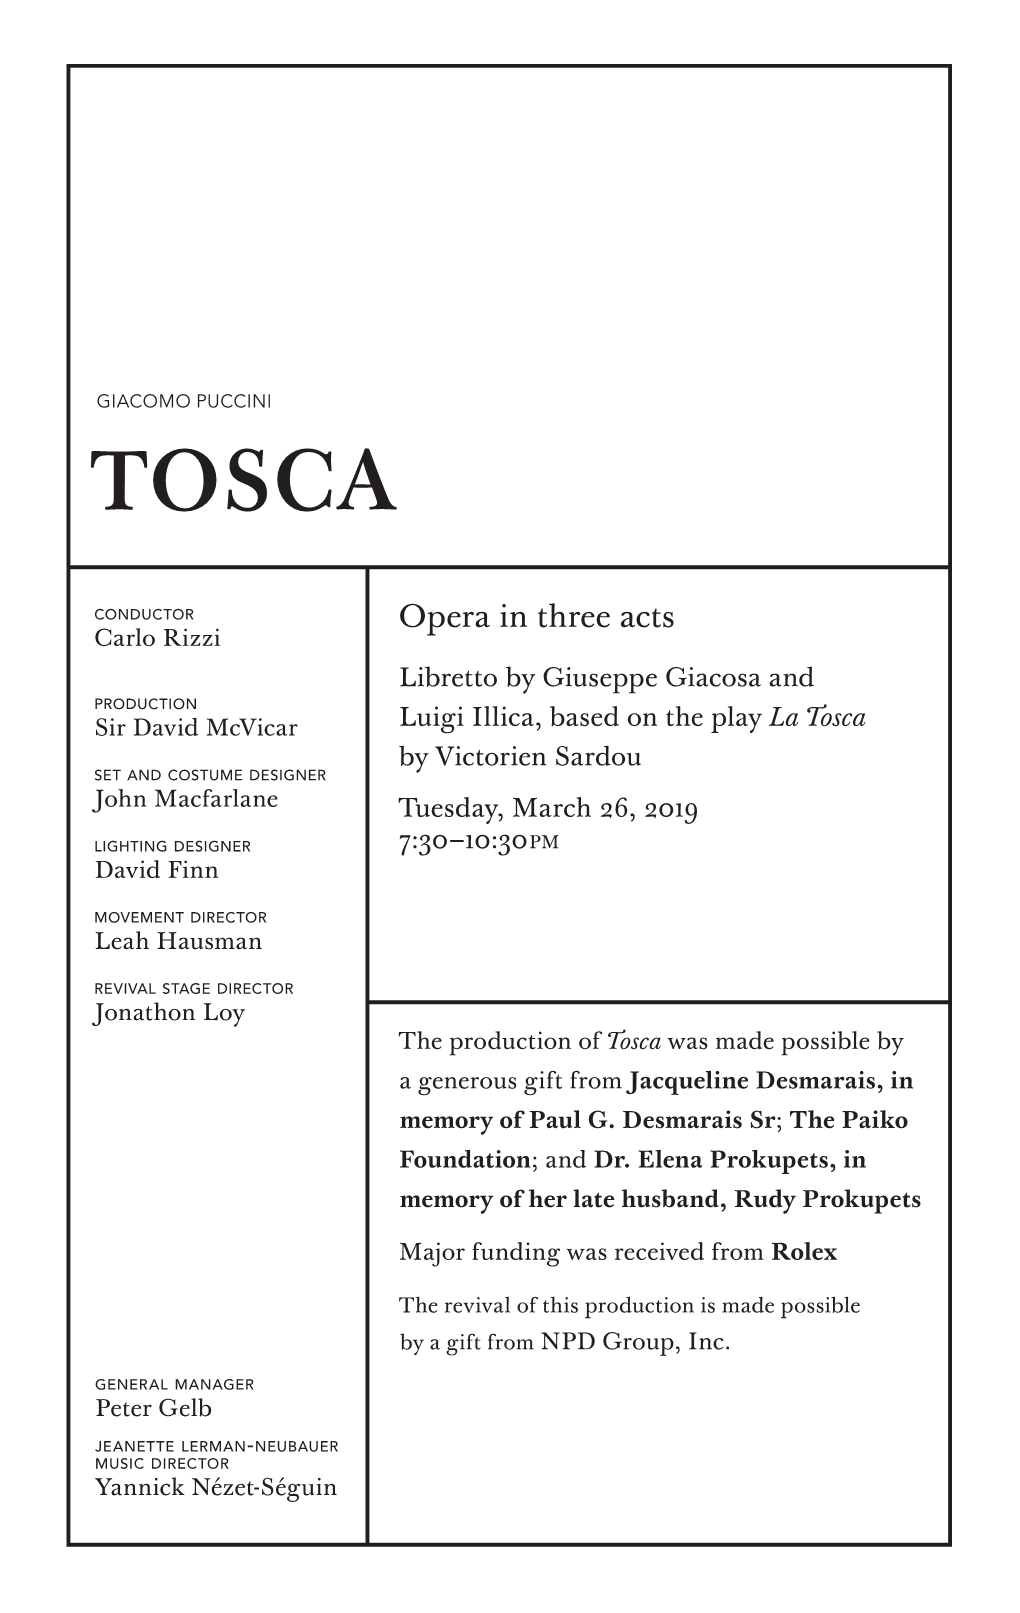 03-26-2019 Tosca Eve.Indd